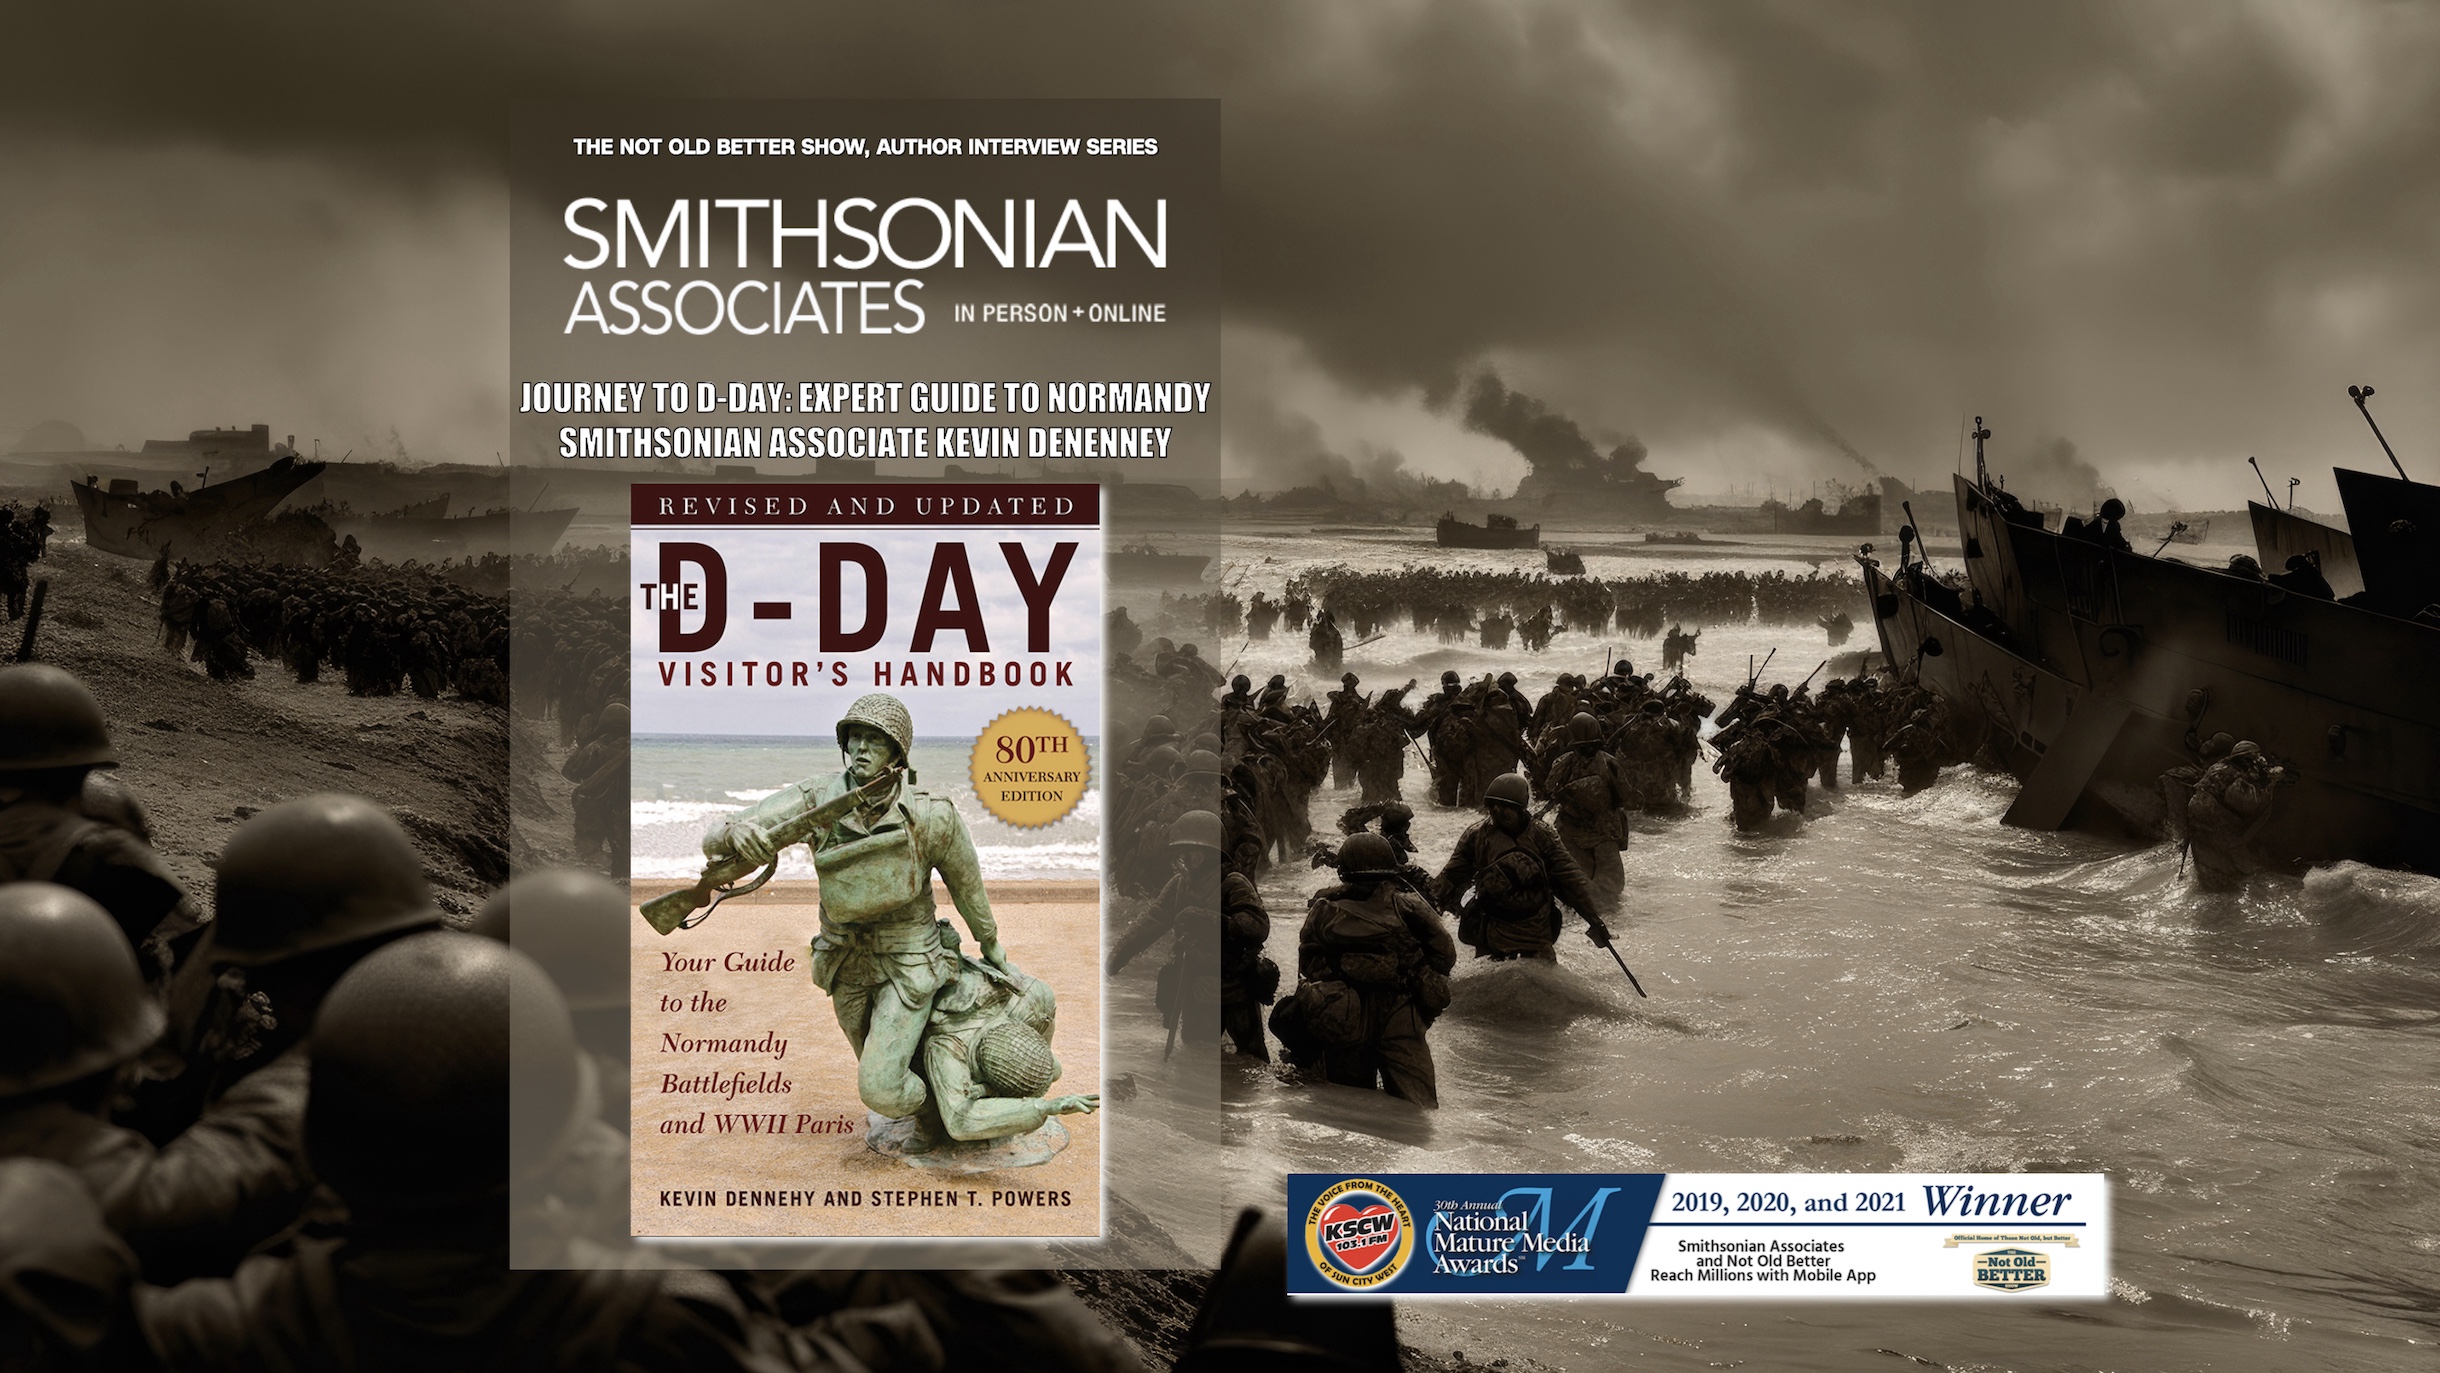 Journey to D-Day: Expert Guide to Normandy with Smithsonian Associate Kevin Dennehy